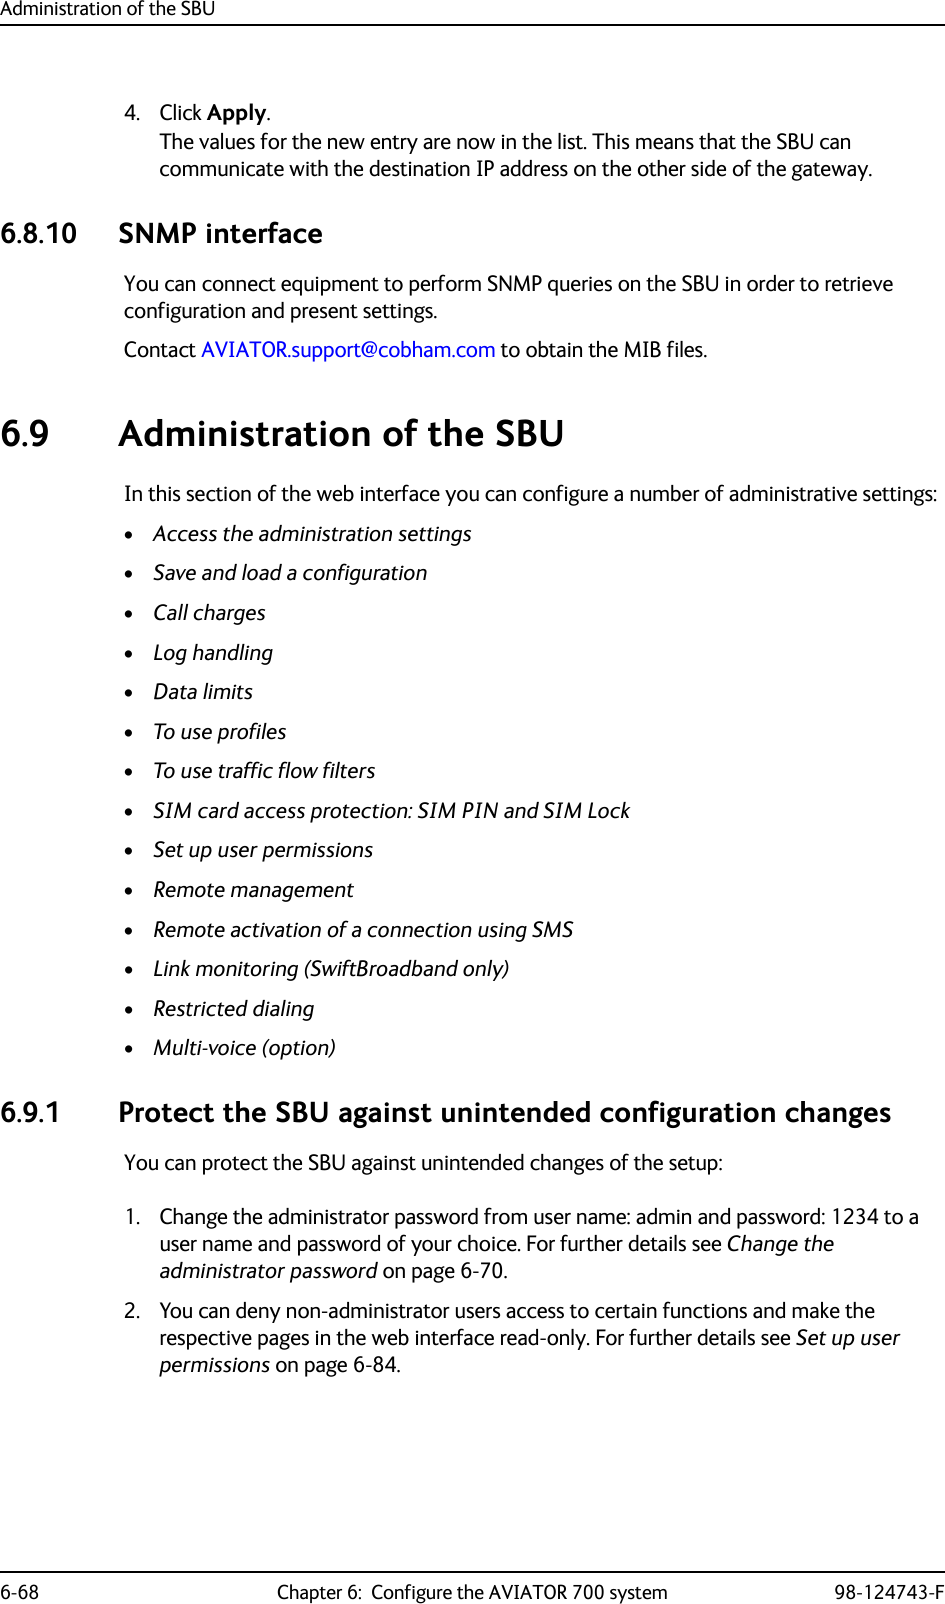 Administration of the SBU6-68 Chapter 6:  Configure the AVIATOR 700 system 98-124743-F4. Click Apply.The values for the new entry are now in the list. This means that the SBU can communicate with the destination IP address on the other side of the gateway.6.8.10 SNMP interface    You can connect equipment to perform SNMP queries on the SBU in order to retrieve configuration and present settings. Contact AVIATOR.support@cobham.com to obtain the MIB files.6.9 Administration of the SBUIn this section of the web interface you can configure a number of administrative settings:•Access the administration settings•Save and load a configuration•Call charges•Log handling•Data limits•To use profiles•To use traffic flow filters•SIM card access protection: SIM PIN and SIM Lock•Set up user permissions•Remote management•Remote activation of a connection using SMS•Link monitoring (SwiftBroadband only)•Restricted dialing•Multi-voice (option)6.9.1 Protect the SBU against unintended configuration changesYou can protect the SBU against unintended changes of the setup:1. Change the administrator password from user name: admin and password: 1234 to a user name and password of your choice. For further details see Change the administrator password on page 6-70.2. You can deny non-administrator users access to certain functions and make the respective pages in the web interface read-only. For further details see Set up user permissions on page 6-84.